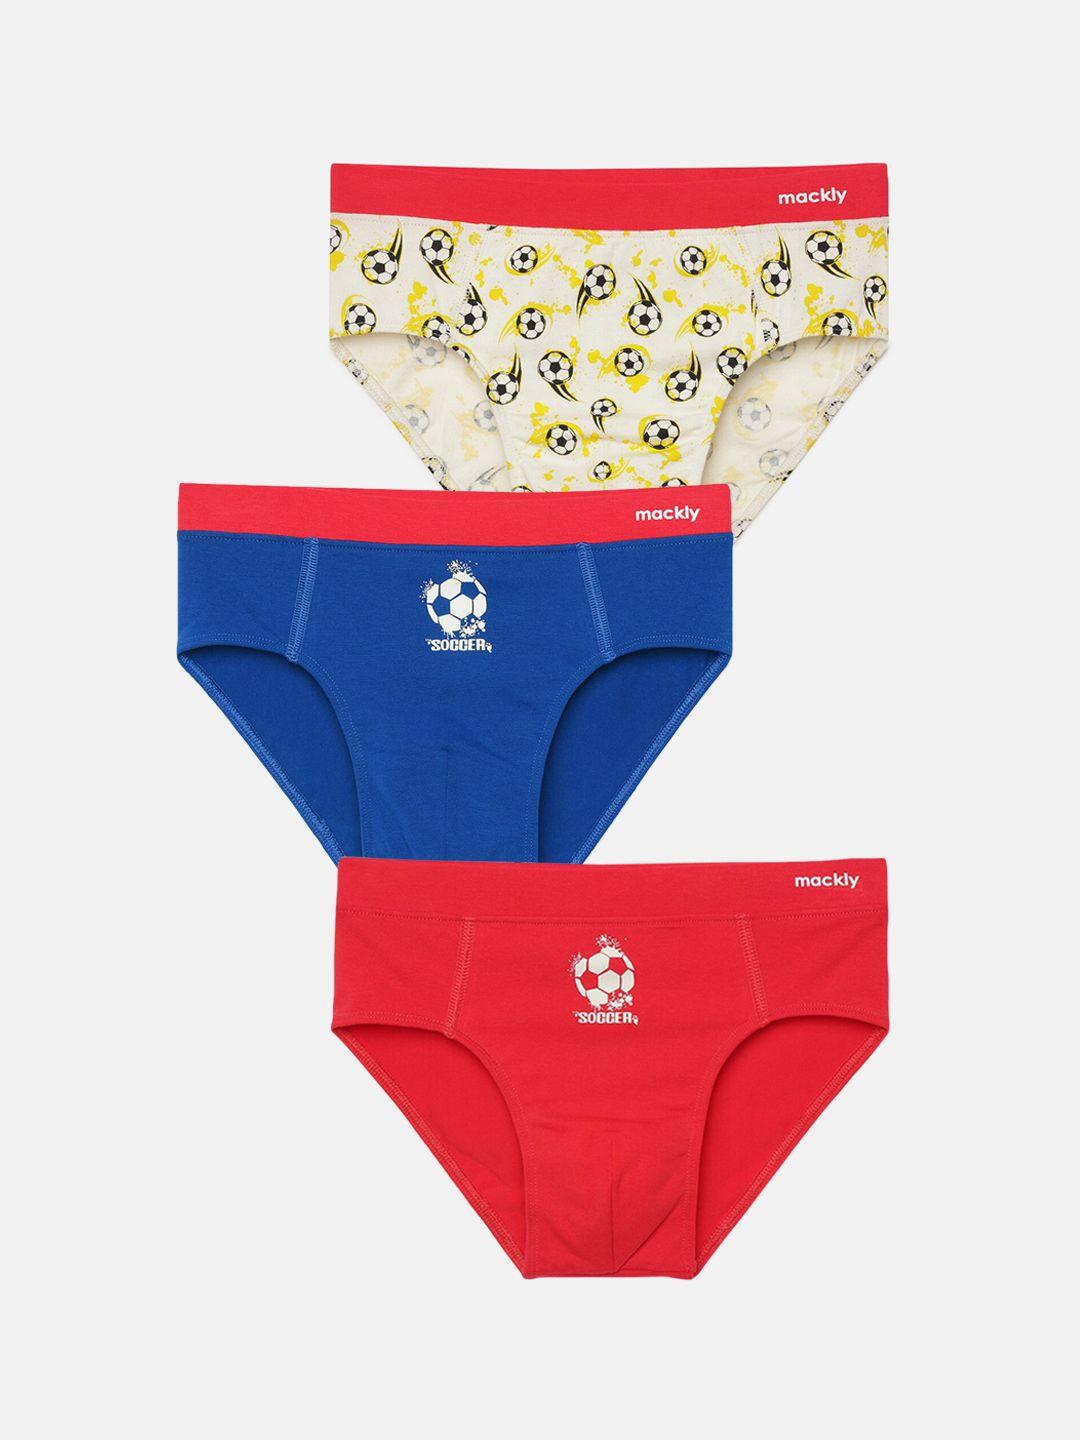 mackly boys pack of 3 printed cotton briefs mb-572